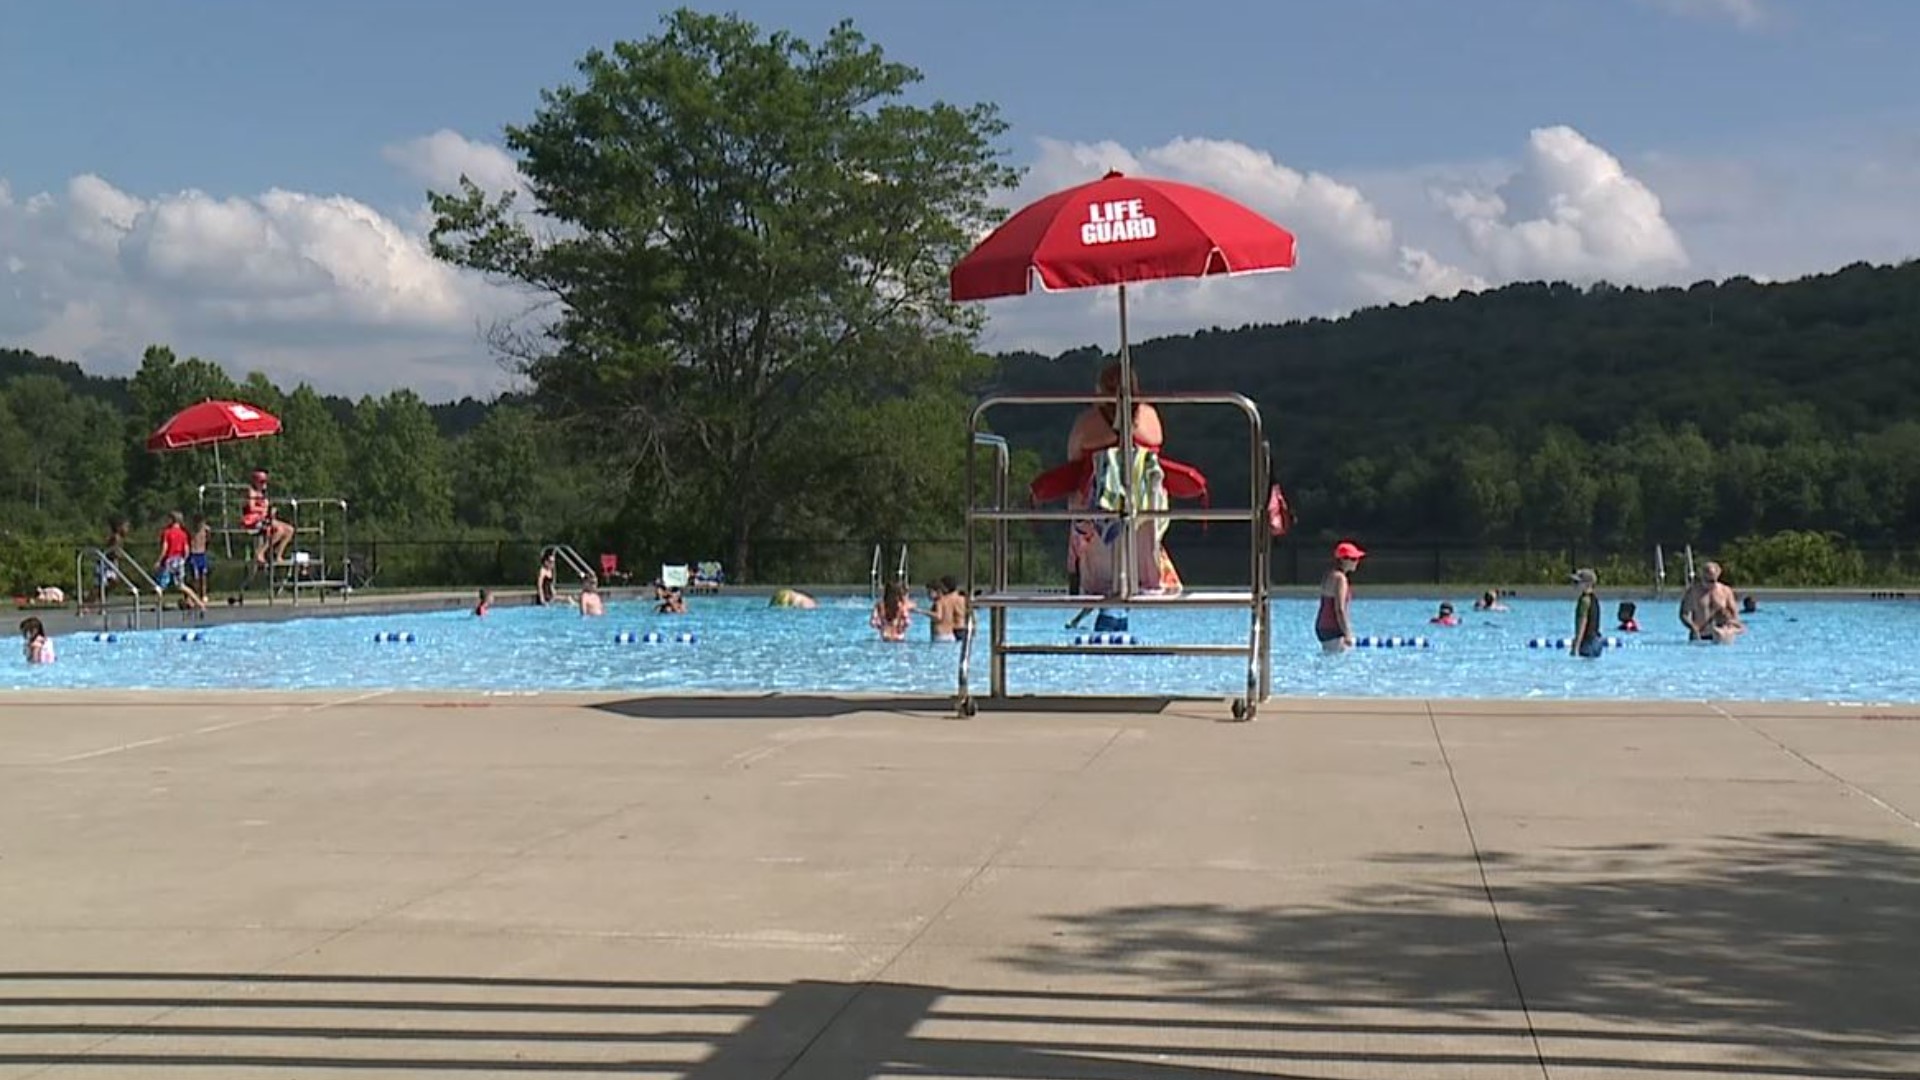 The pool at Lackawanna State Park is now closed again due to a lack of lifeguards.